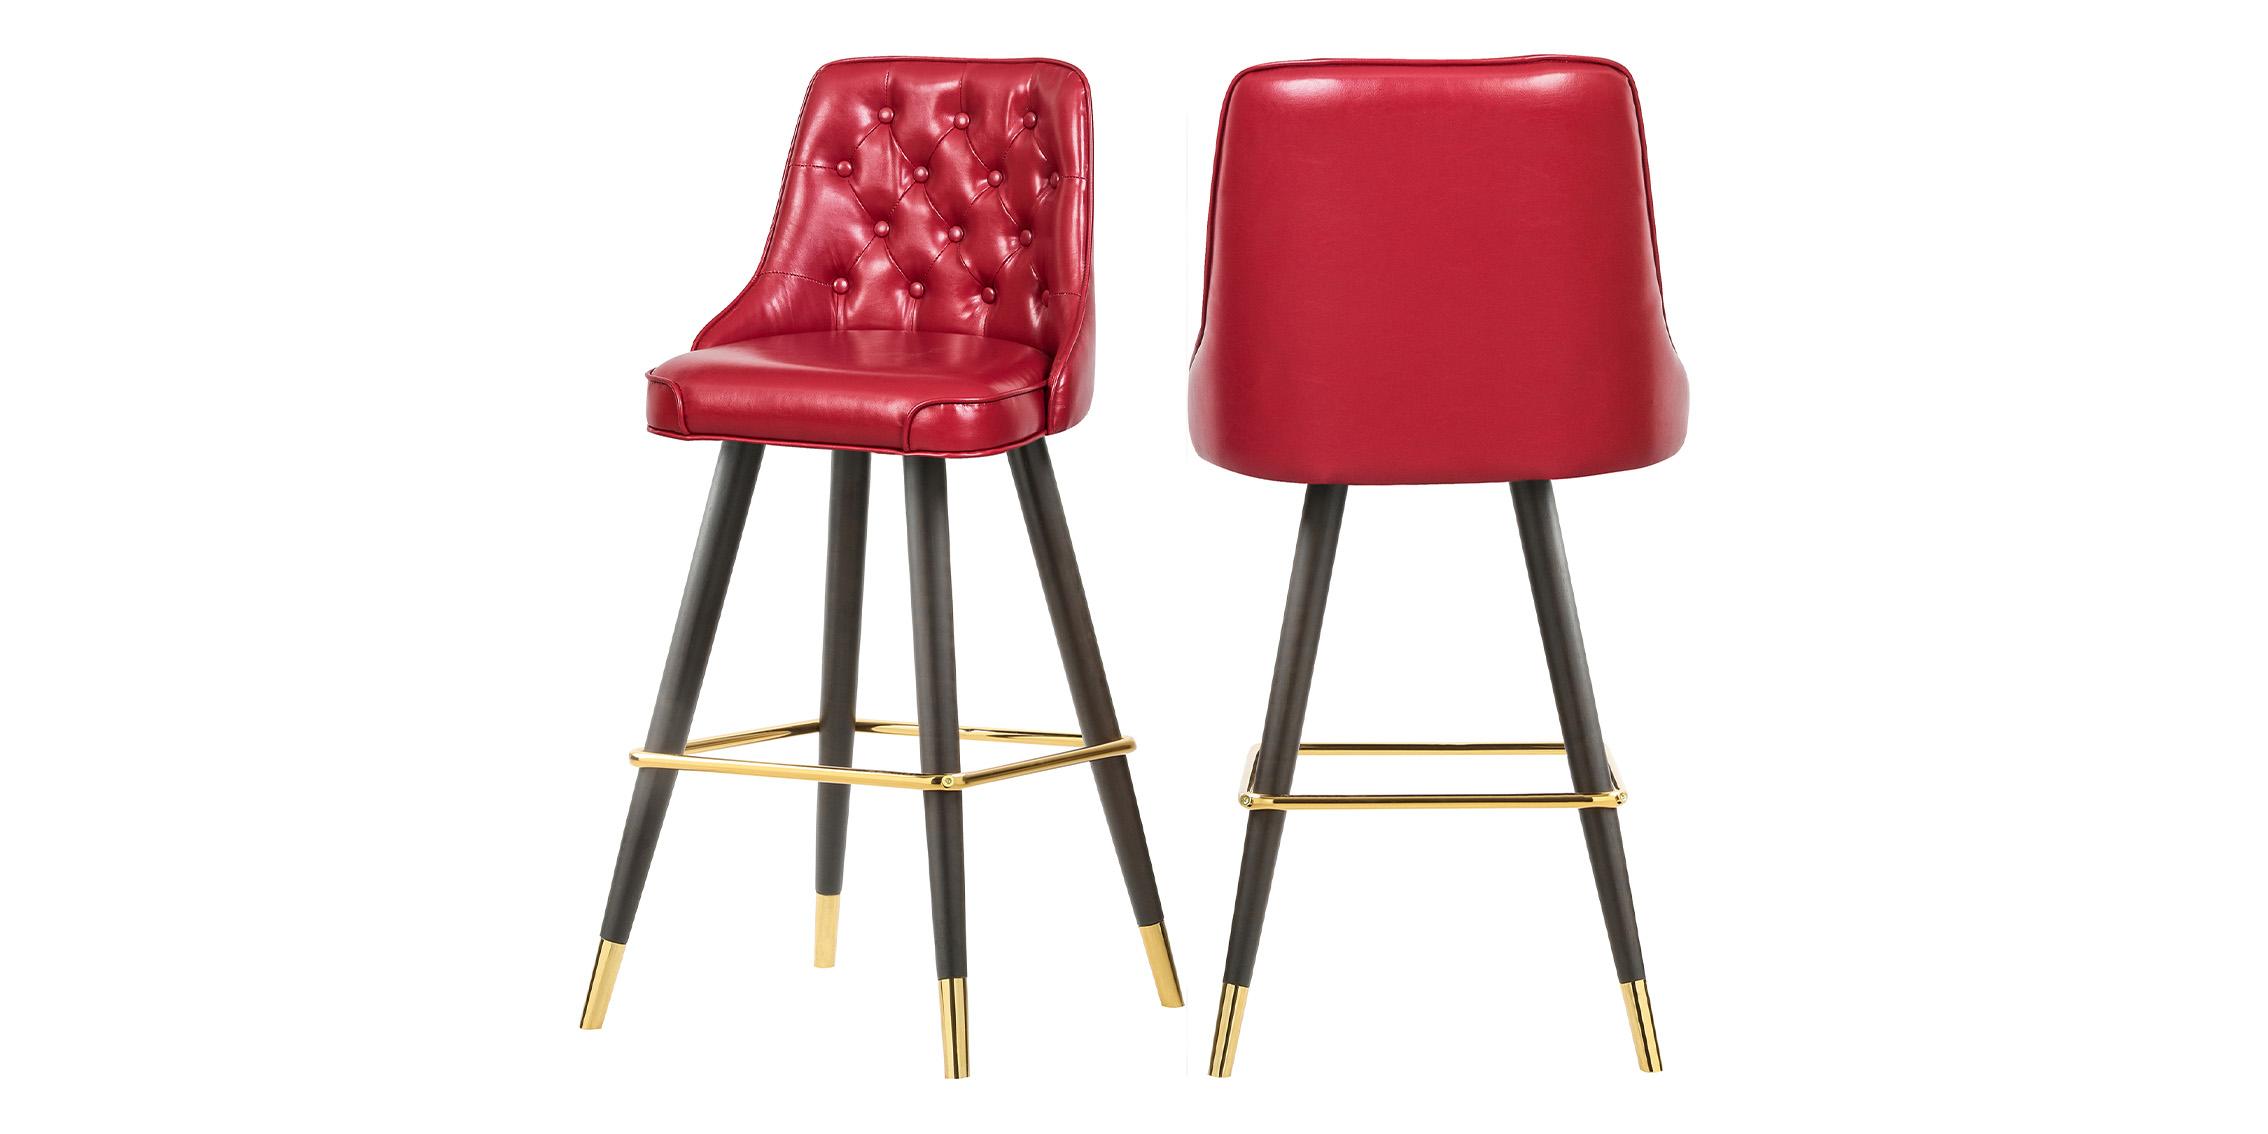 Contemporary, Modern Counter Stool Set PORTNOY 908Red-C 908Red-C in Red Faux Leather